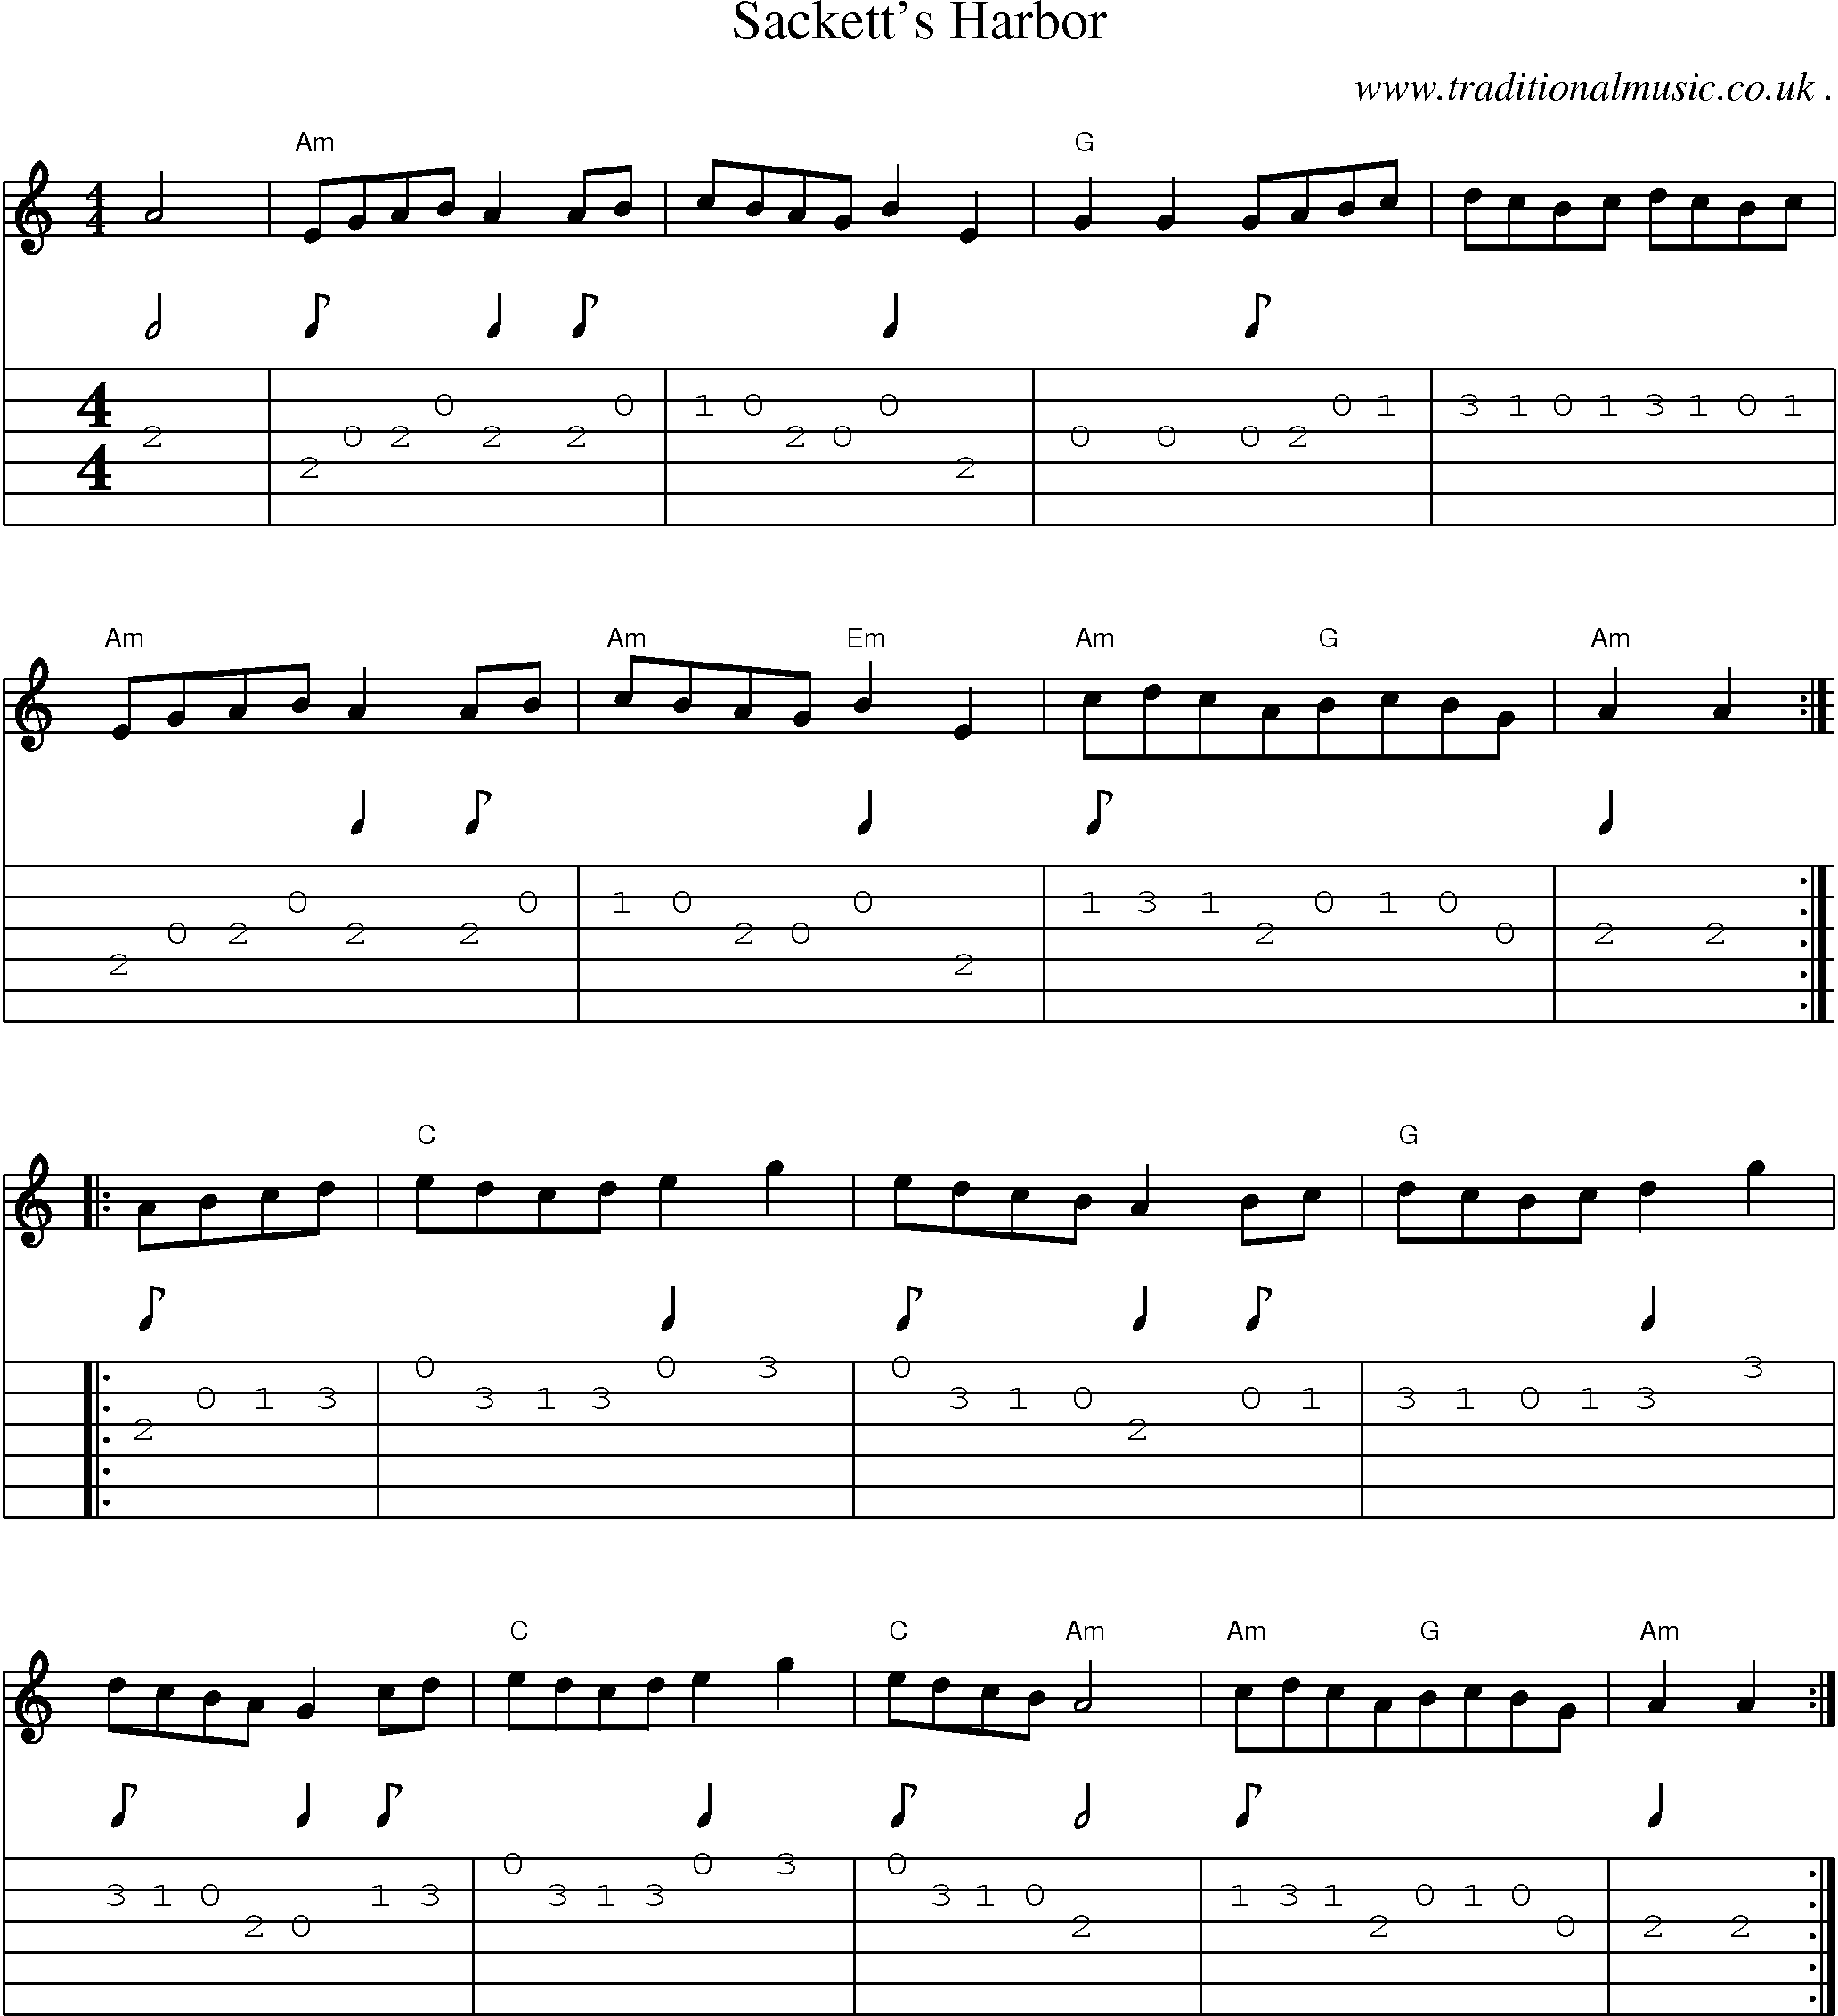 Sheet-Music and Guitar Tabs for Sacketts Harbor